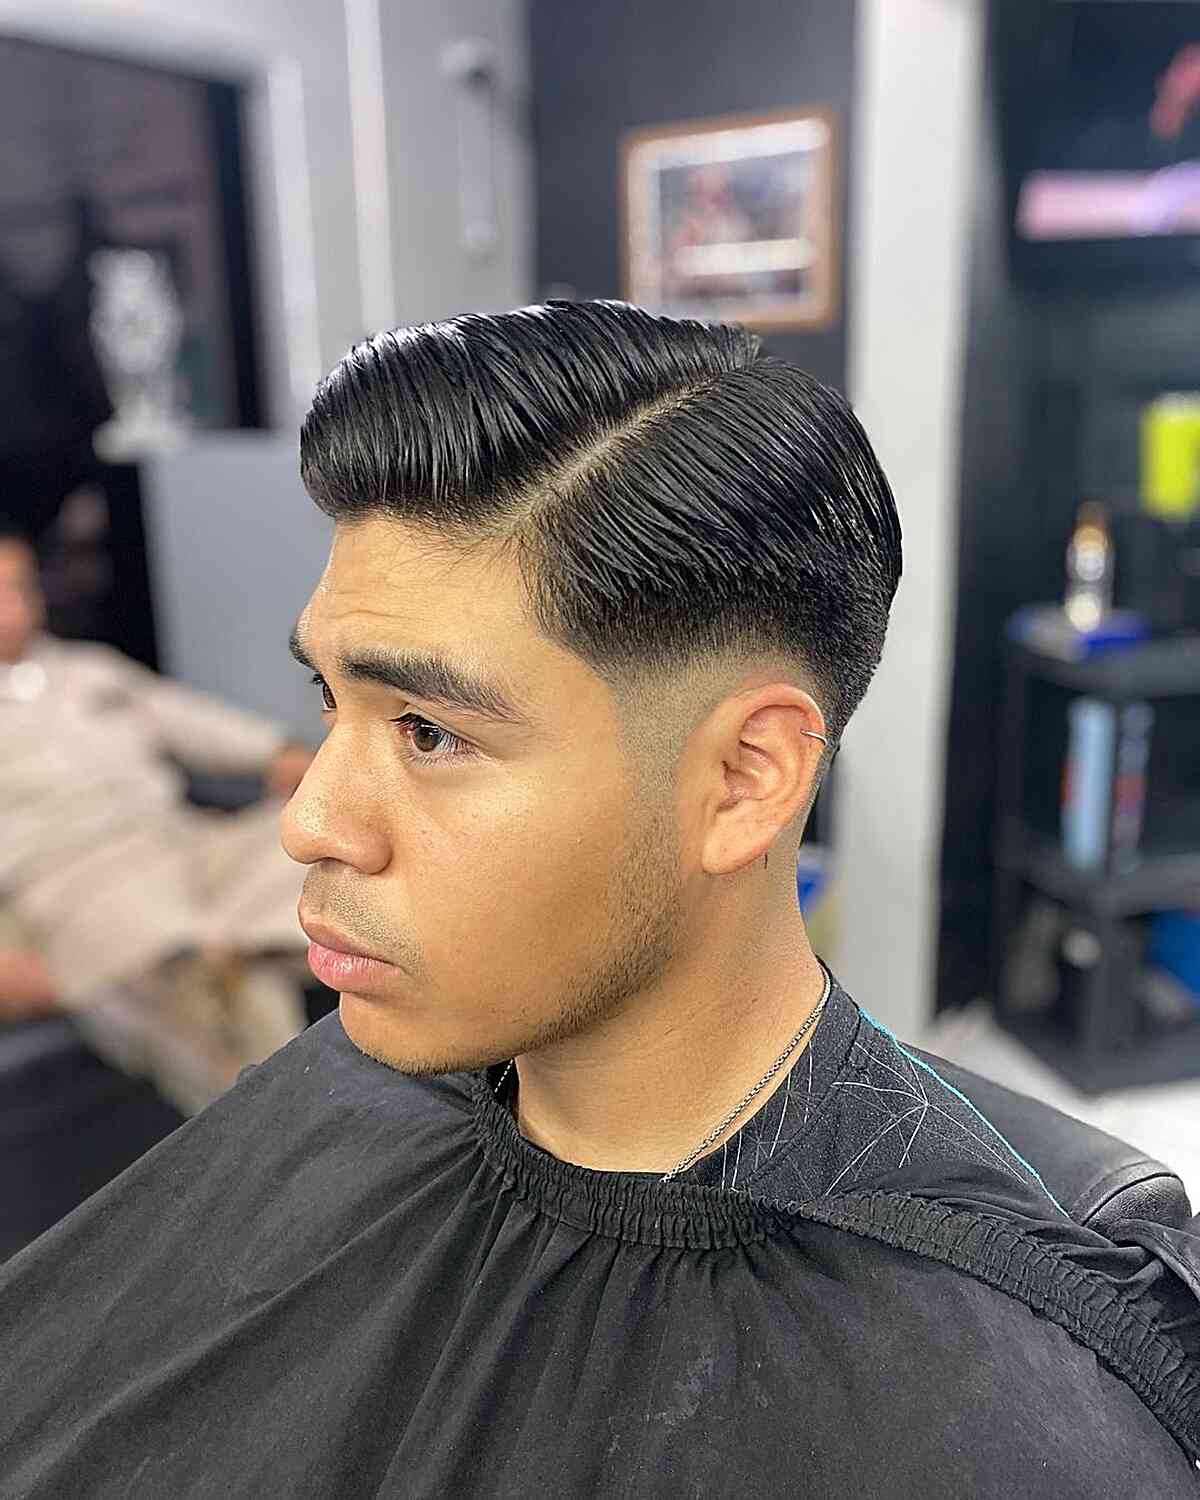 Medium-Length Low Fade and Comb Over Style for Men